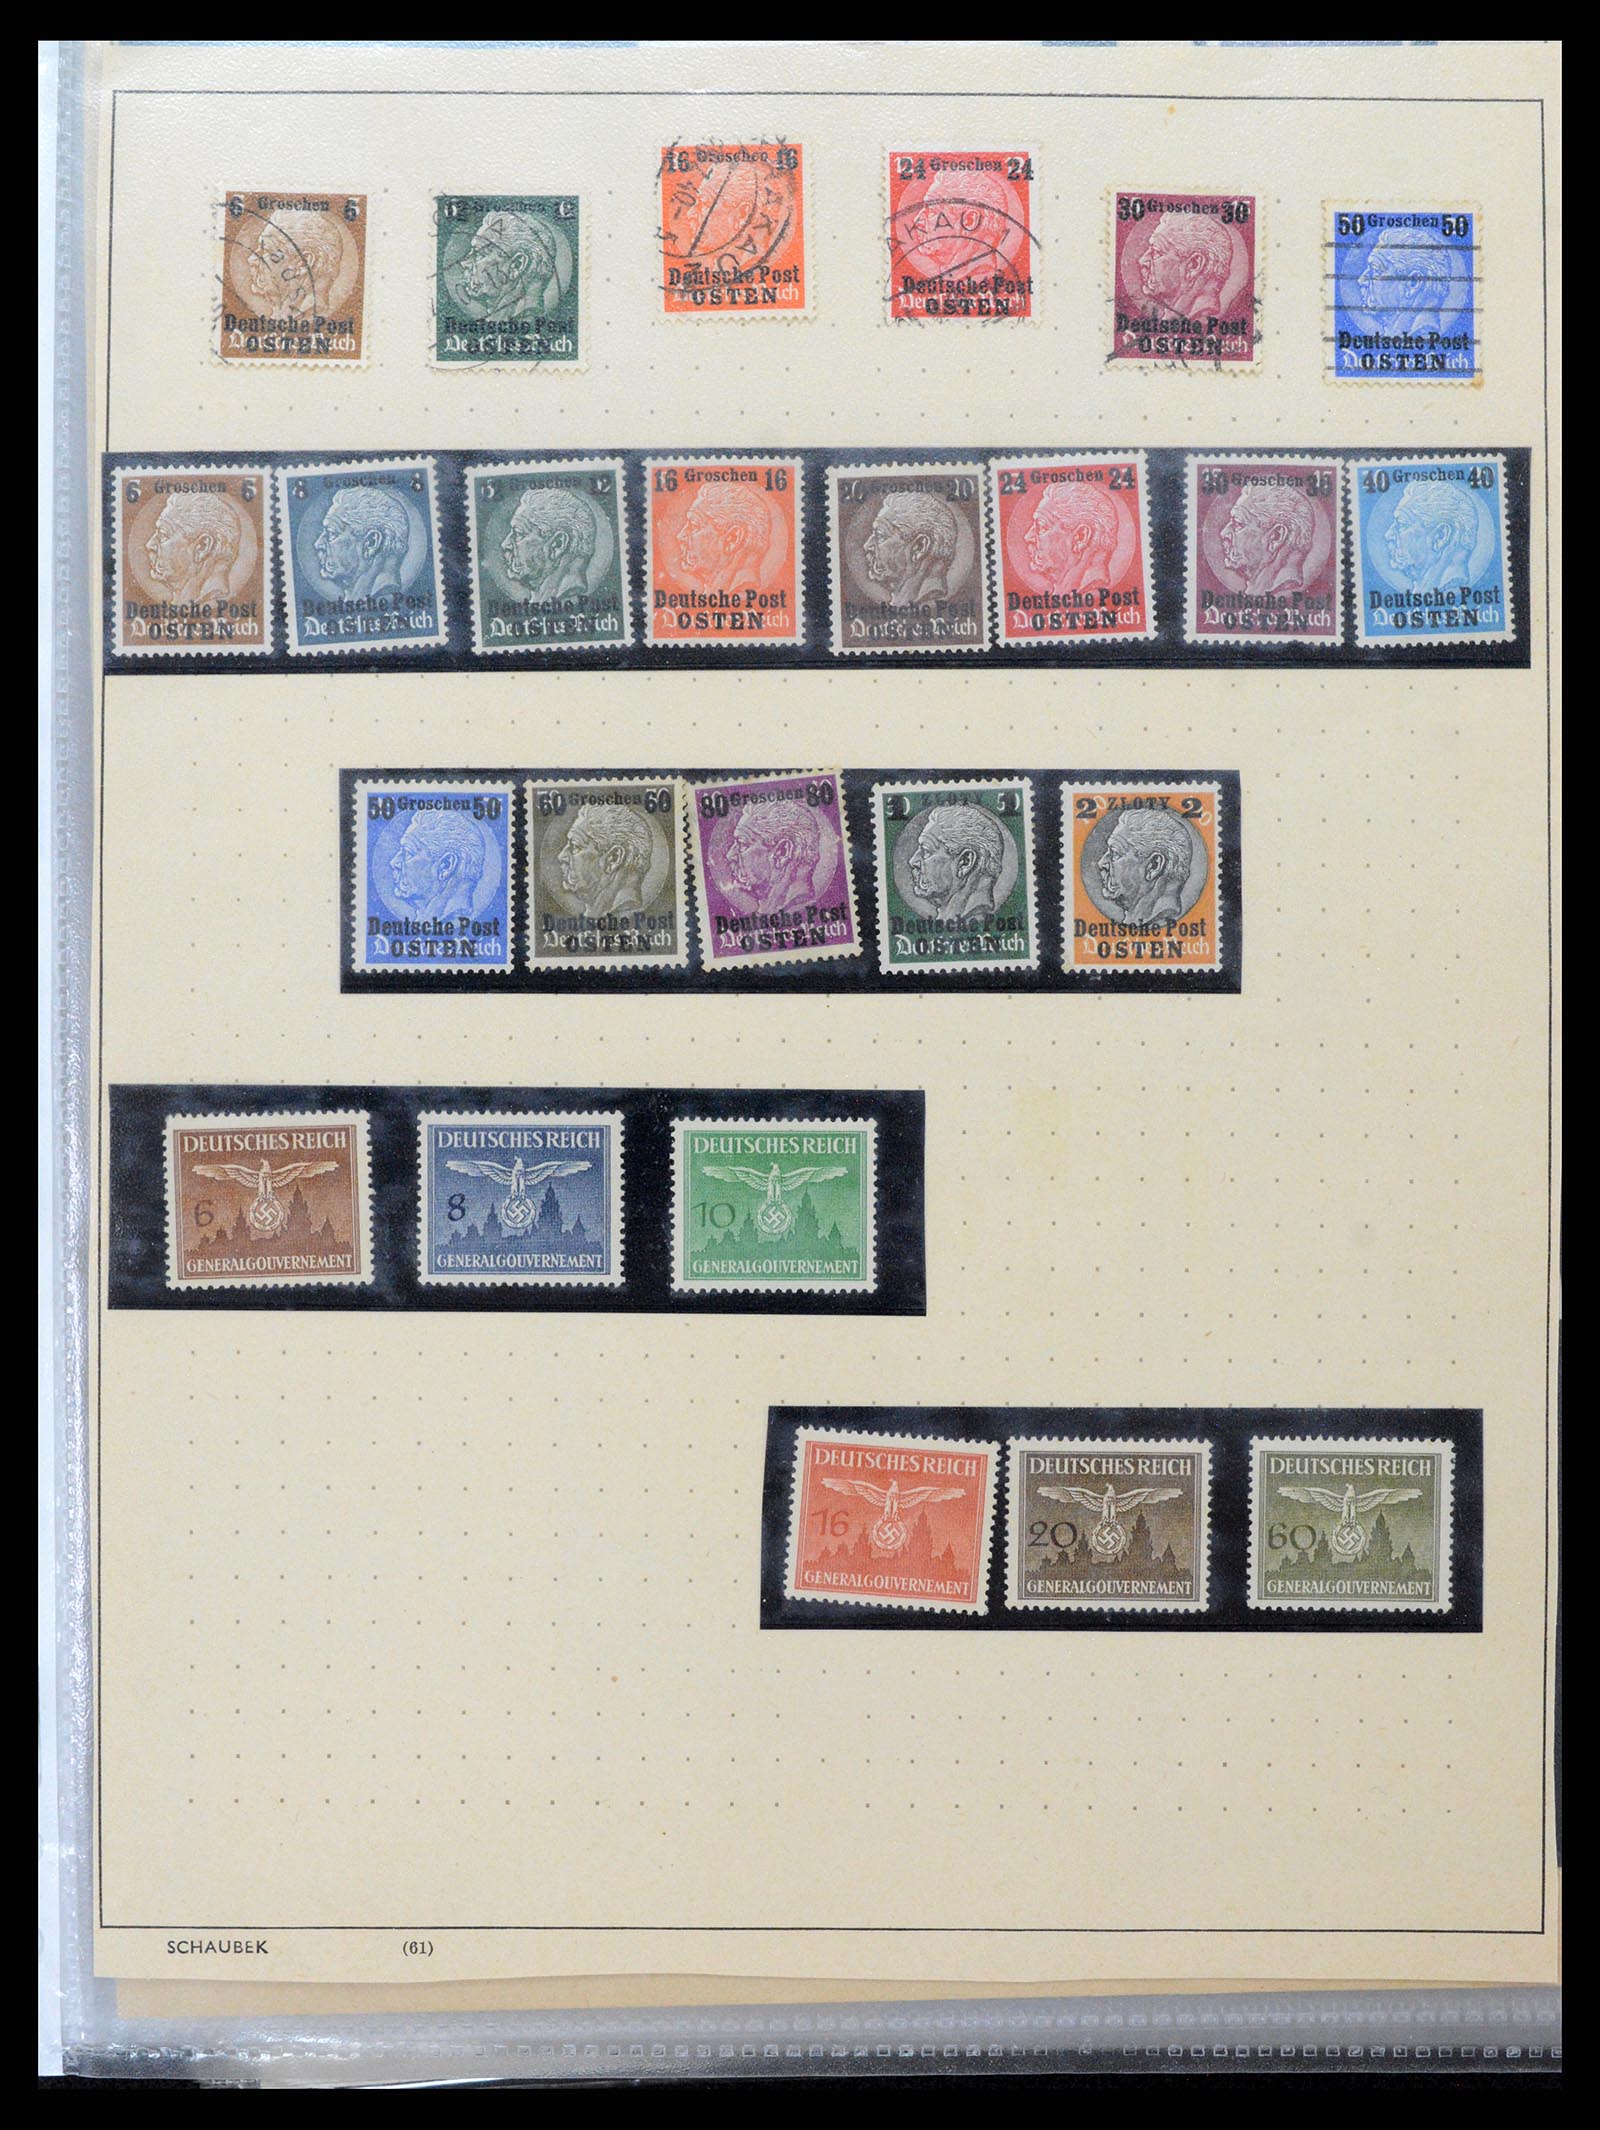 37988 044 - Stamp Collection 37988 European countries 1919-1948.